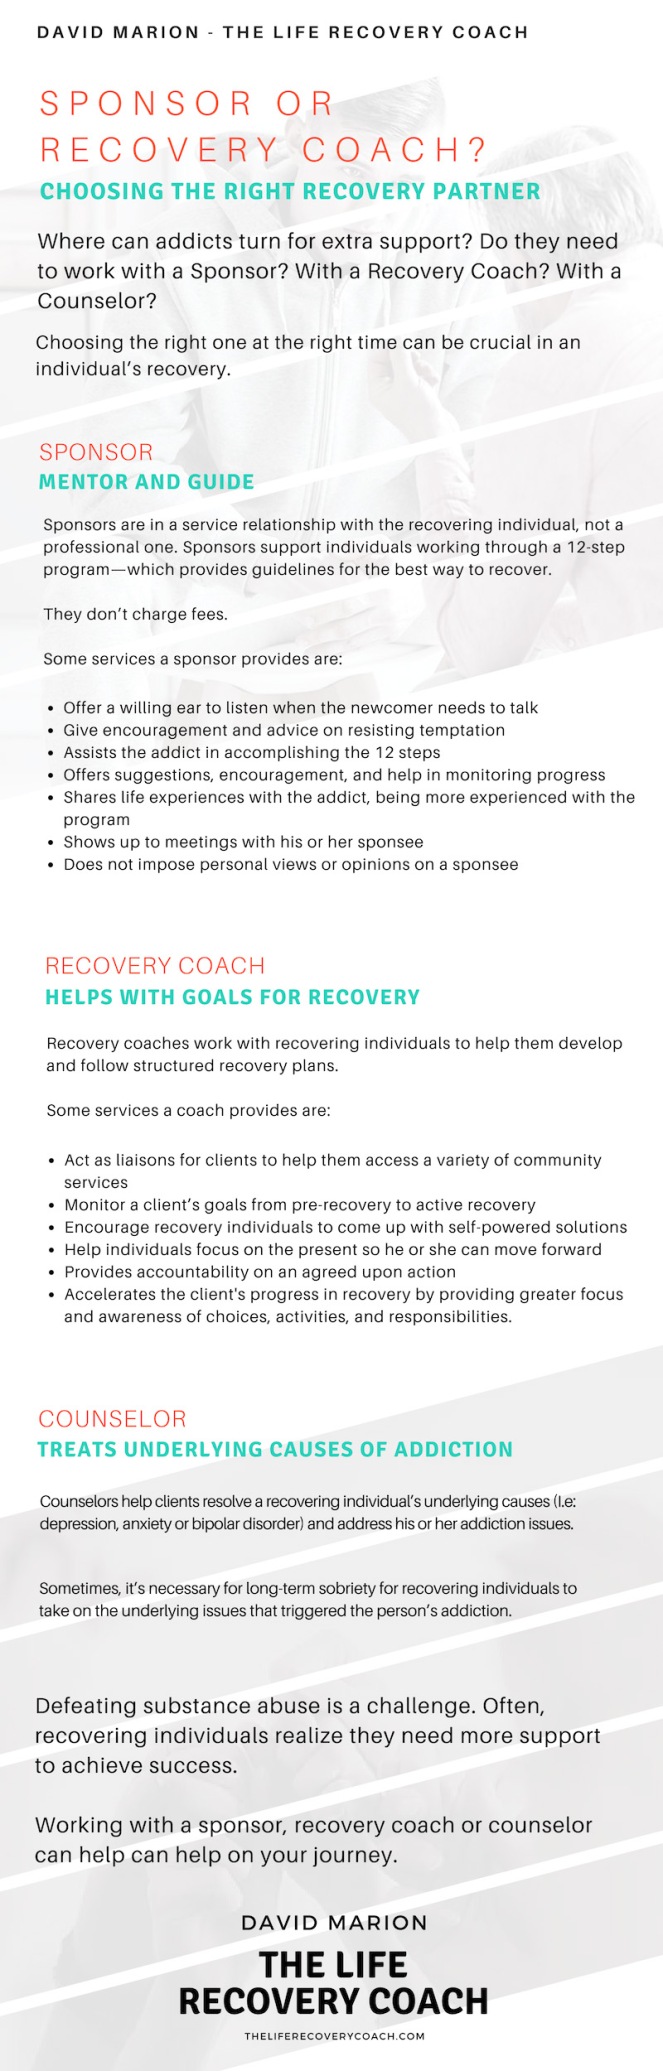 David Marion - How to Choose the Right Recovery Coach - The Life Recovery Coach